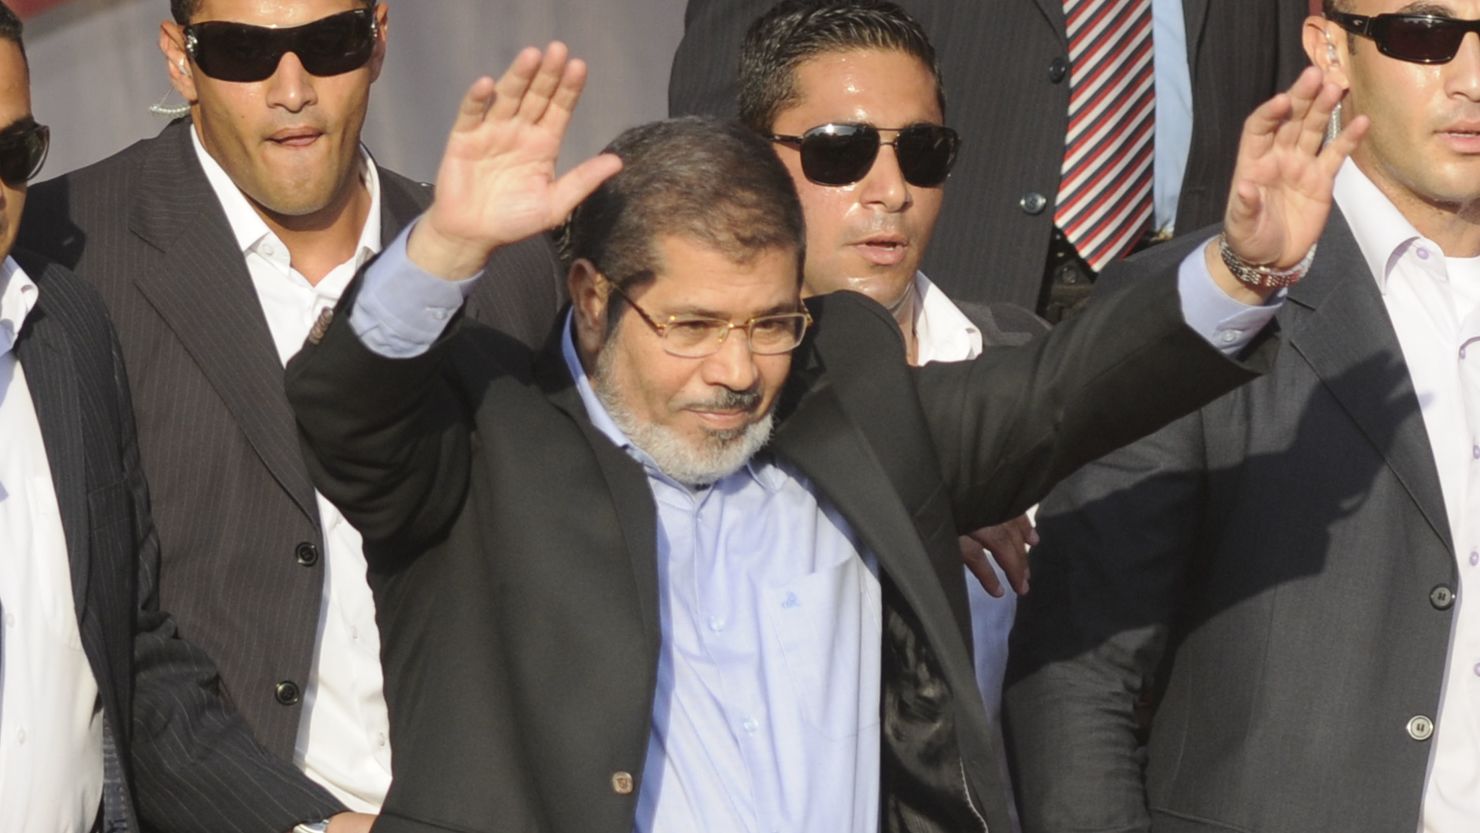 Mohamed Morsy last year issued an order preventing any court from overturning his decisions.